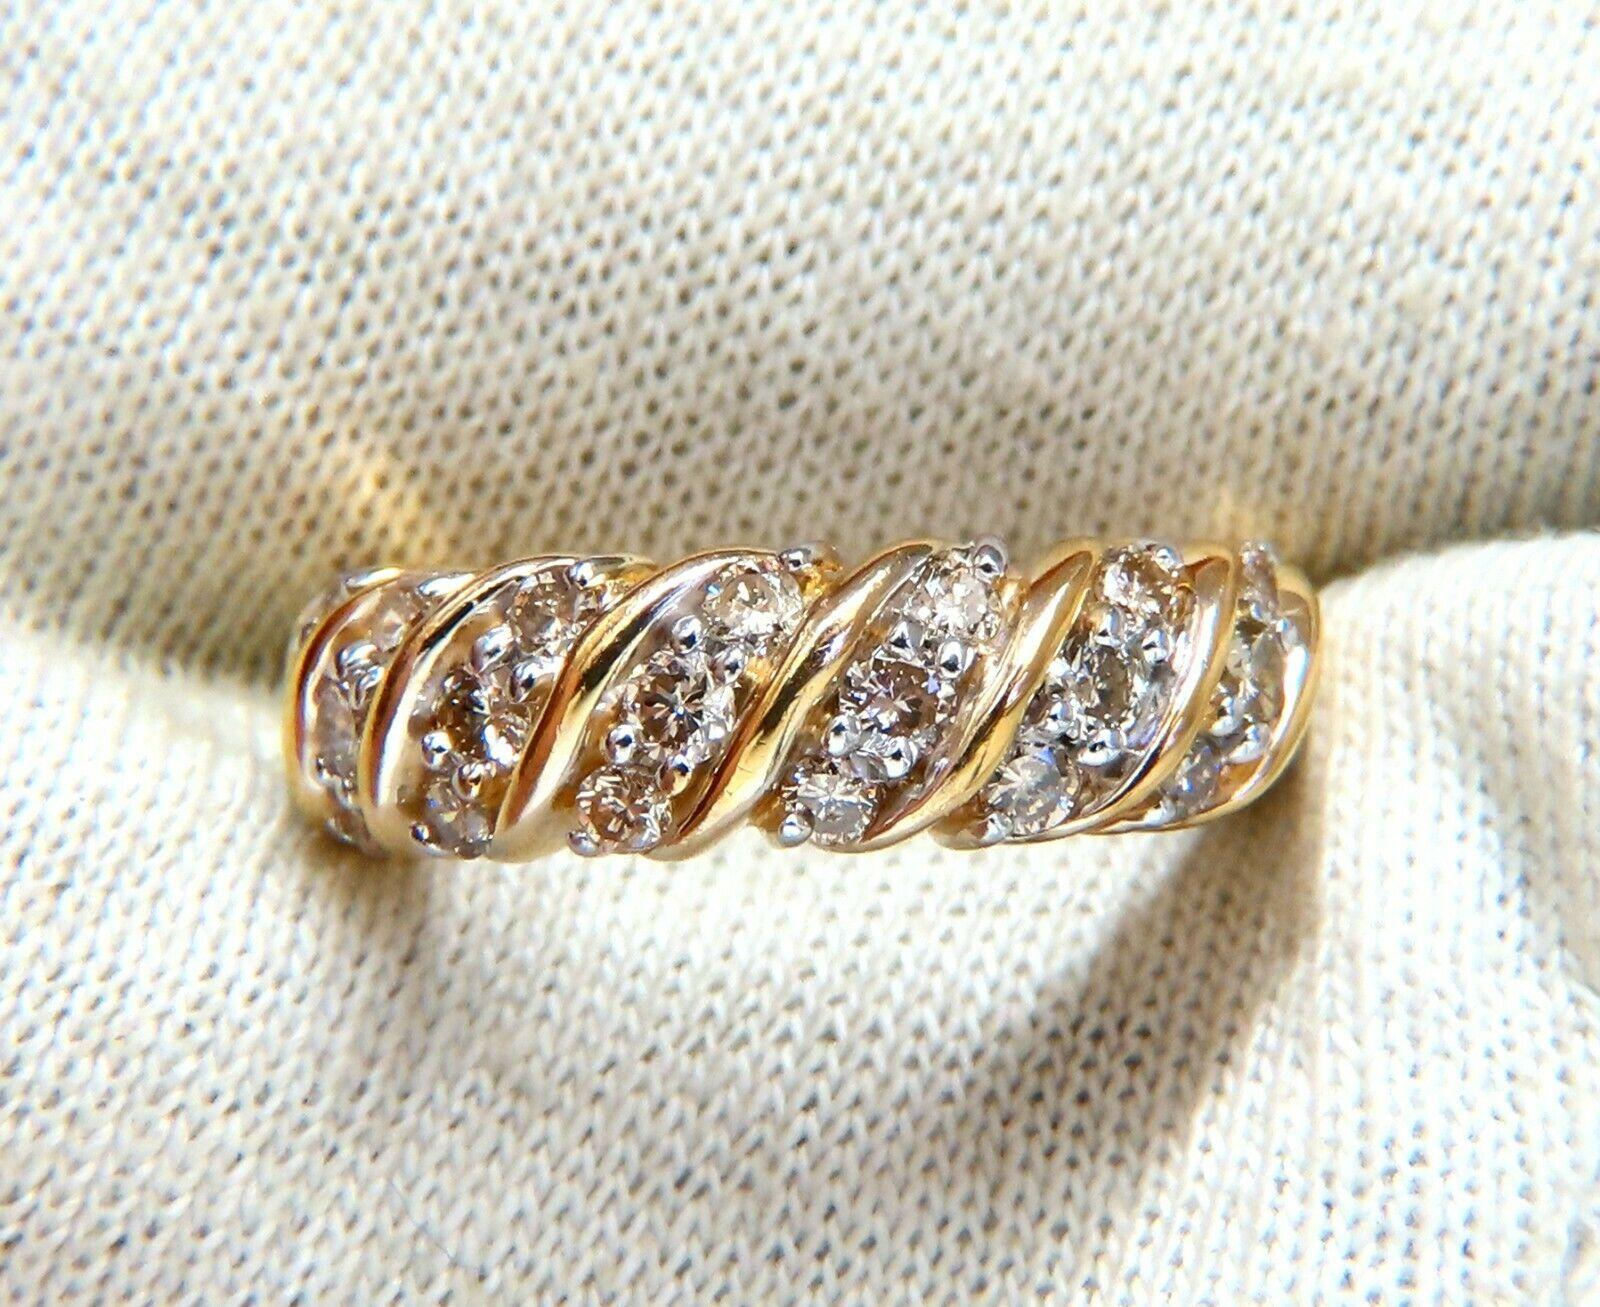 Durable Concave Band

.90ct. Natural round cut brilliant diamond

Durable Built.

Si-1 clarity  J color.

14kt yellow gold.

4.9 Grams

Overall ring: 6.8mm diameter

Depth: 3.8mm

Current ring size: 8

May professionally resize, please inquire.